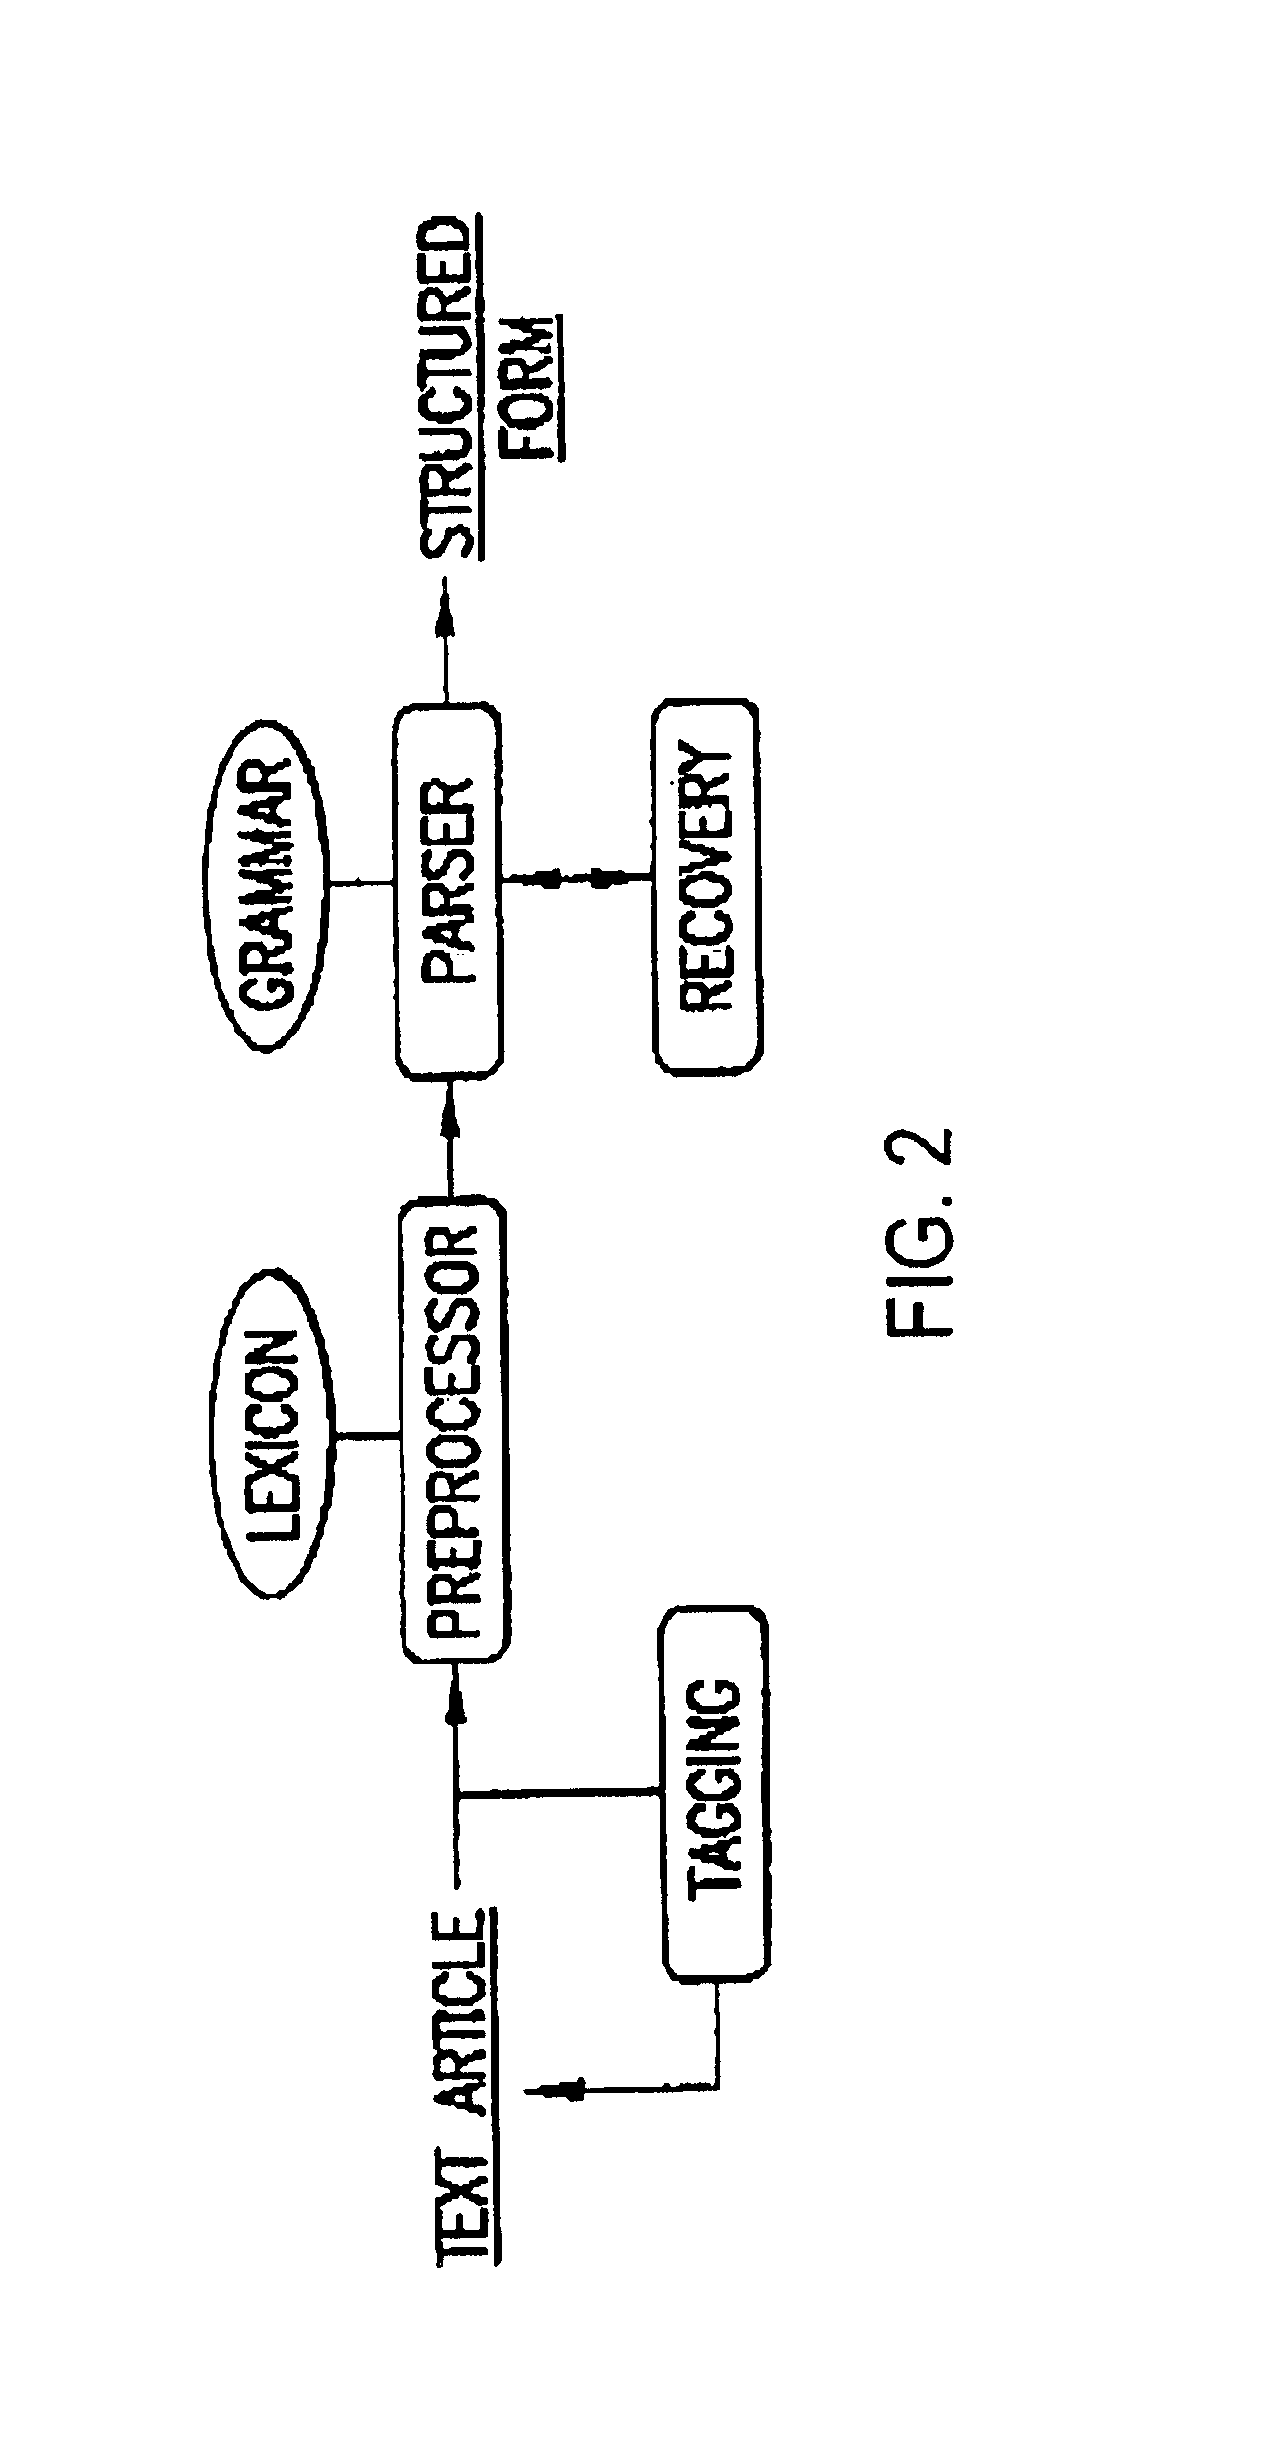 Methods for extracting information on interactions between biological entities from natural language text data